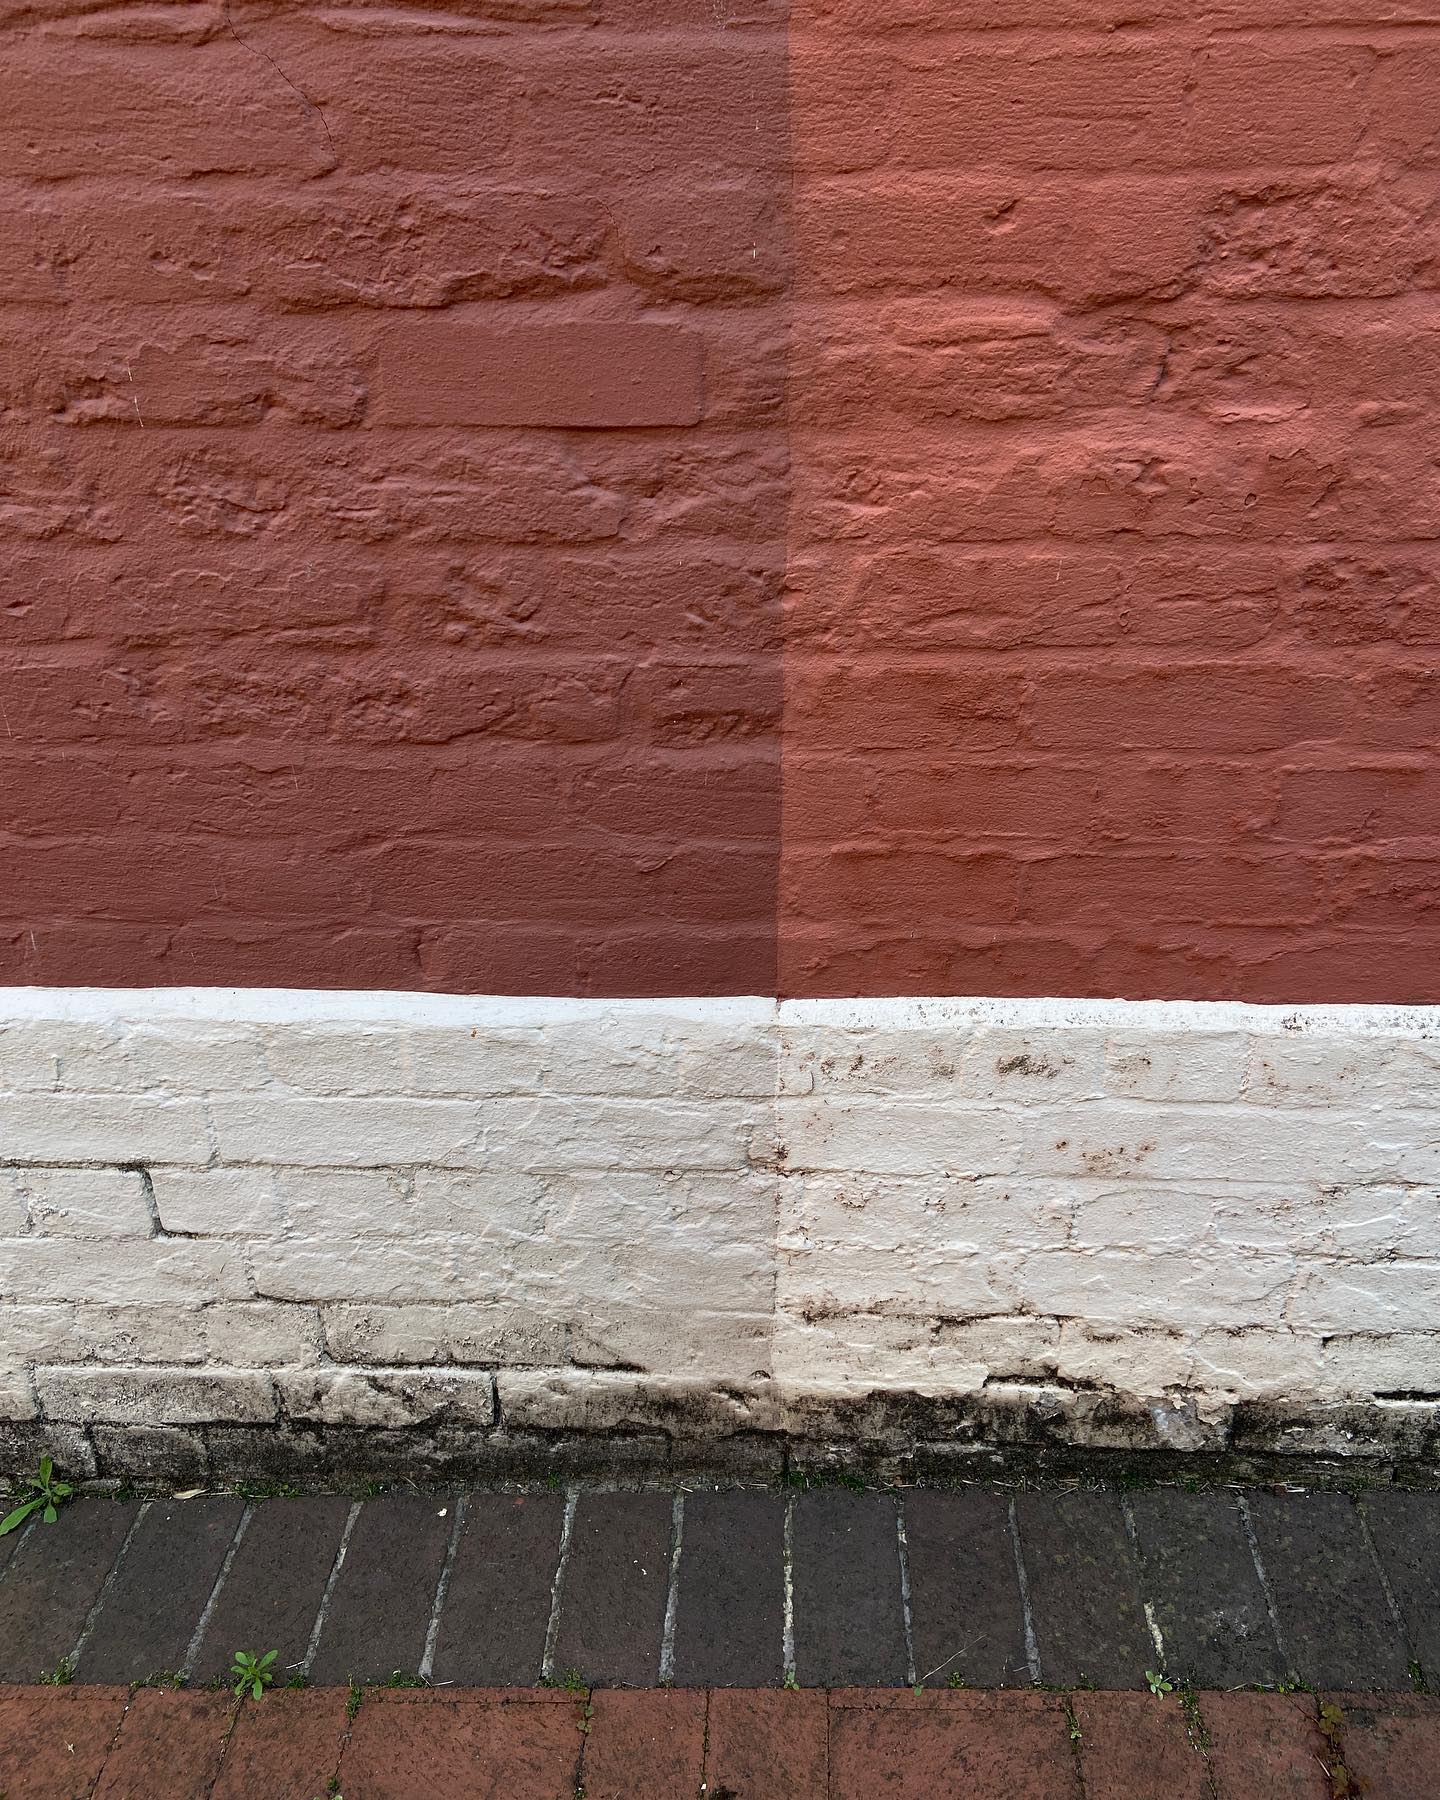 two halves of a whole. fresh red and white on the right, grubby remnants to the left. neatly bisected